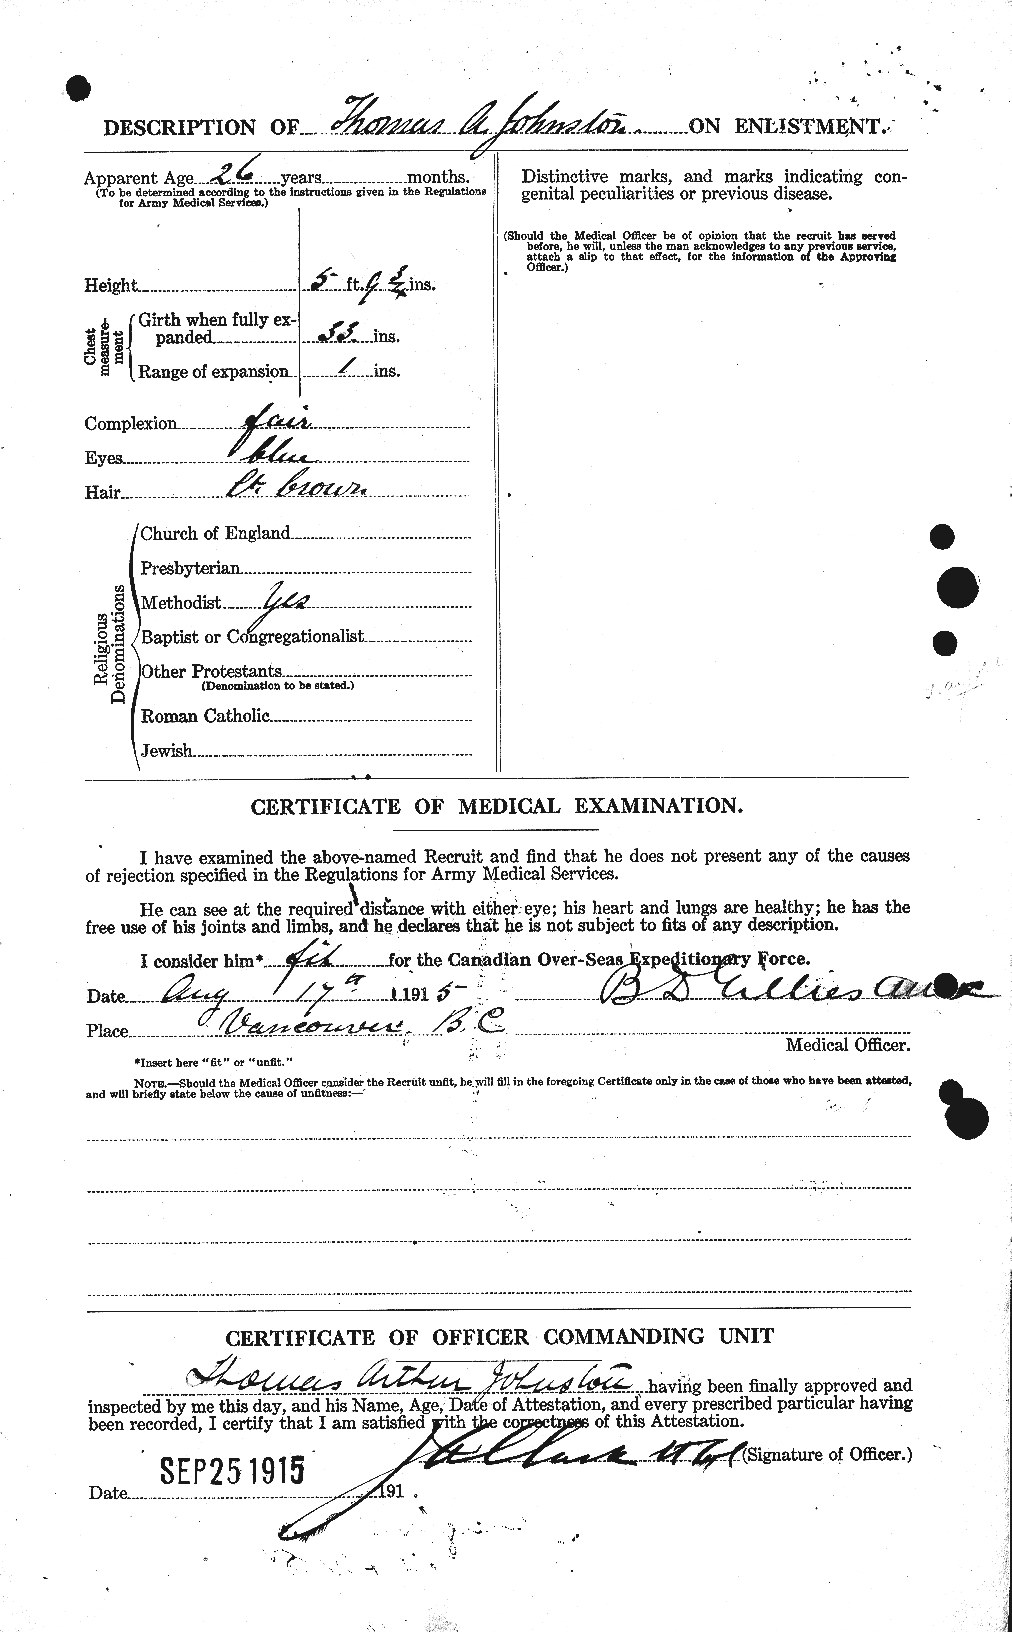 Personnel Records of the First World War - CEF 427155b